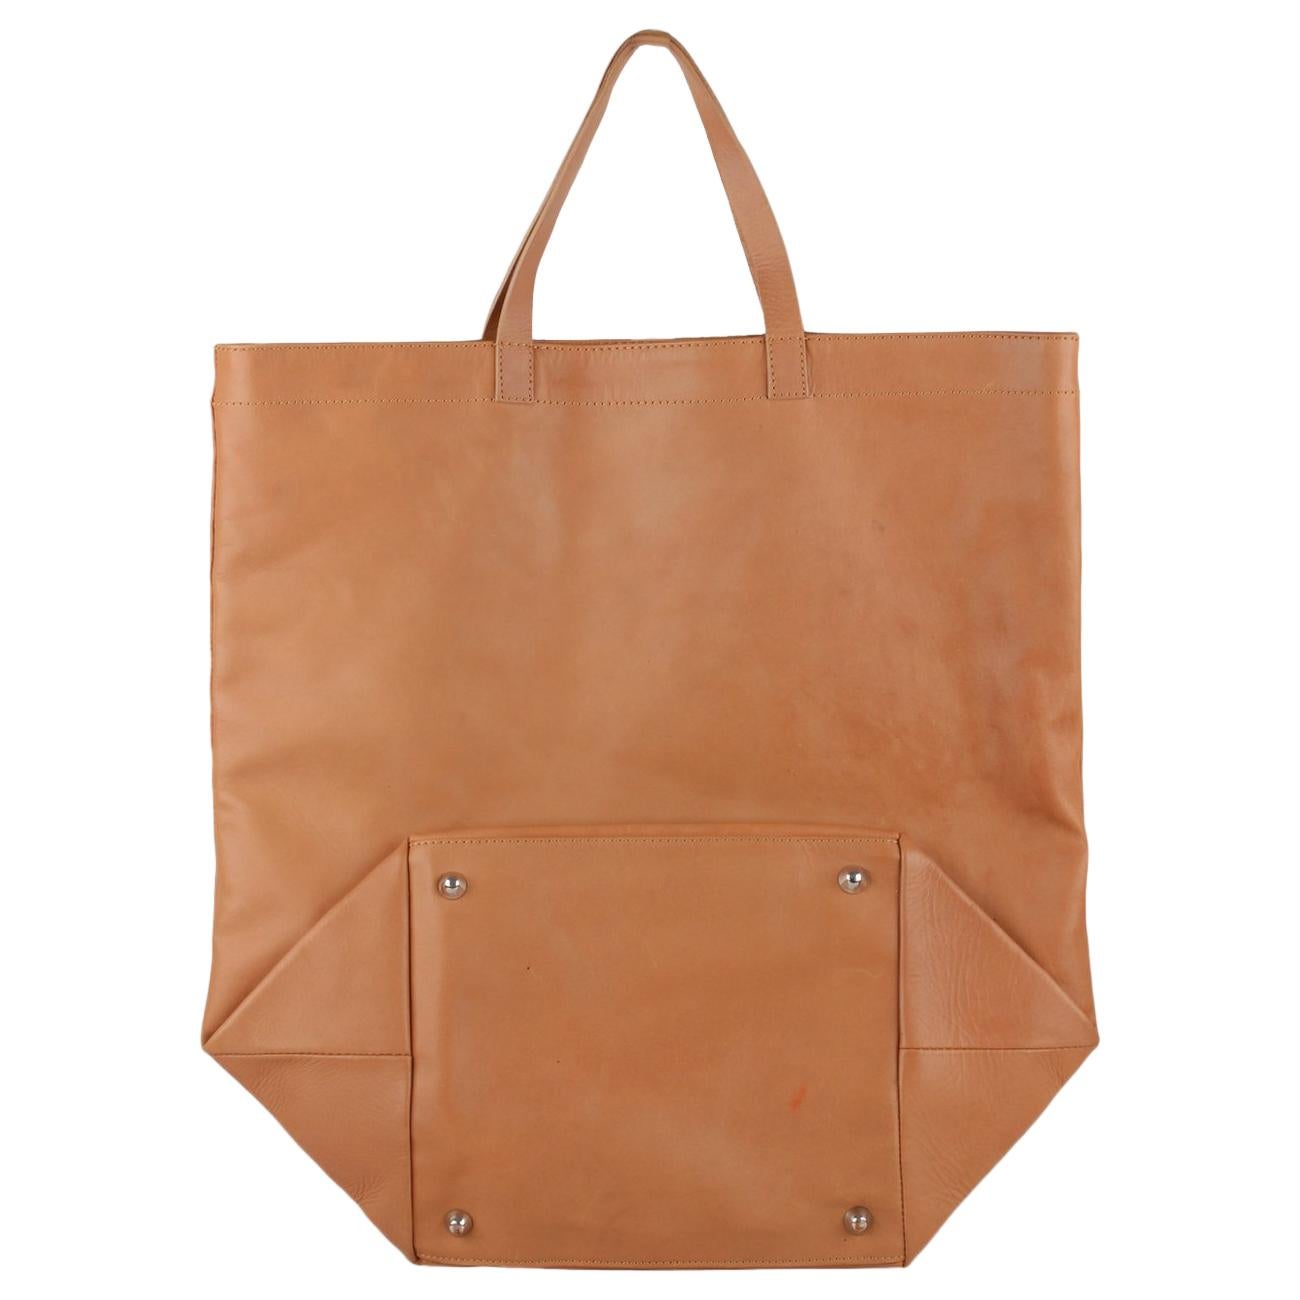 Maison Martin Margiela For H&M Limited Edition Tote